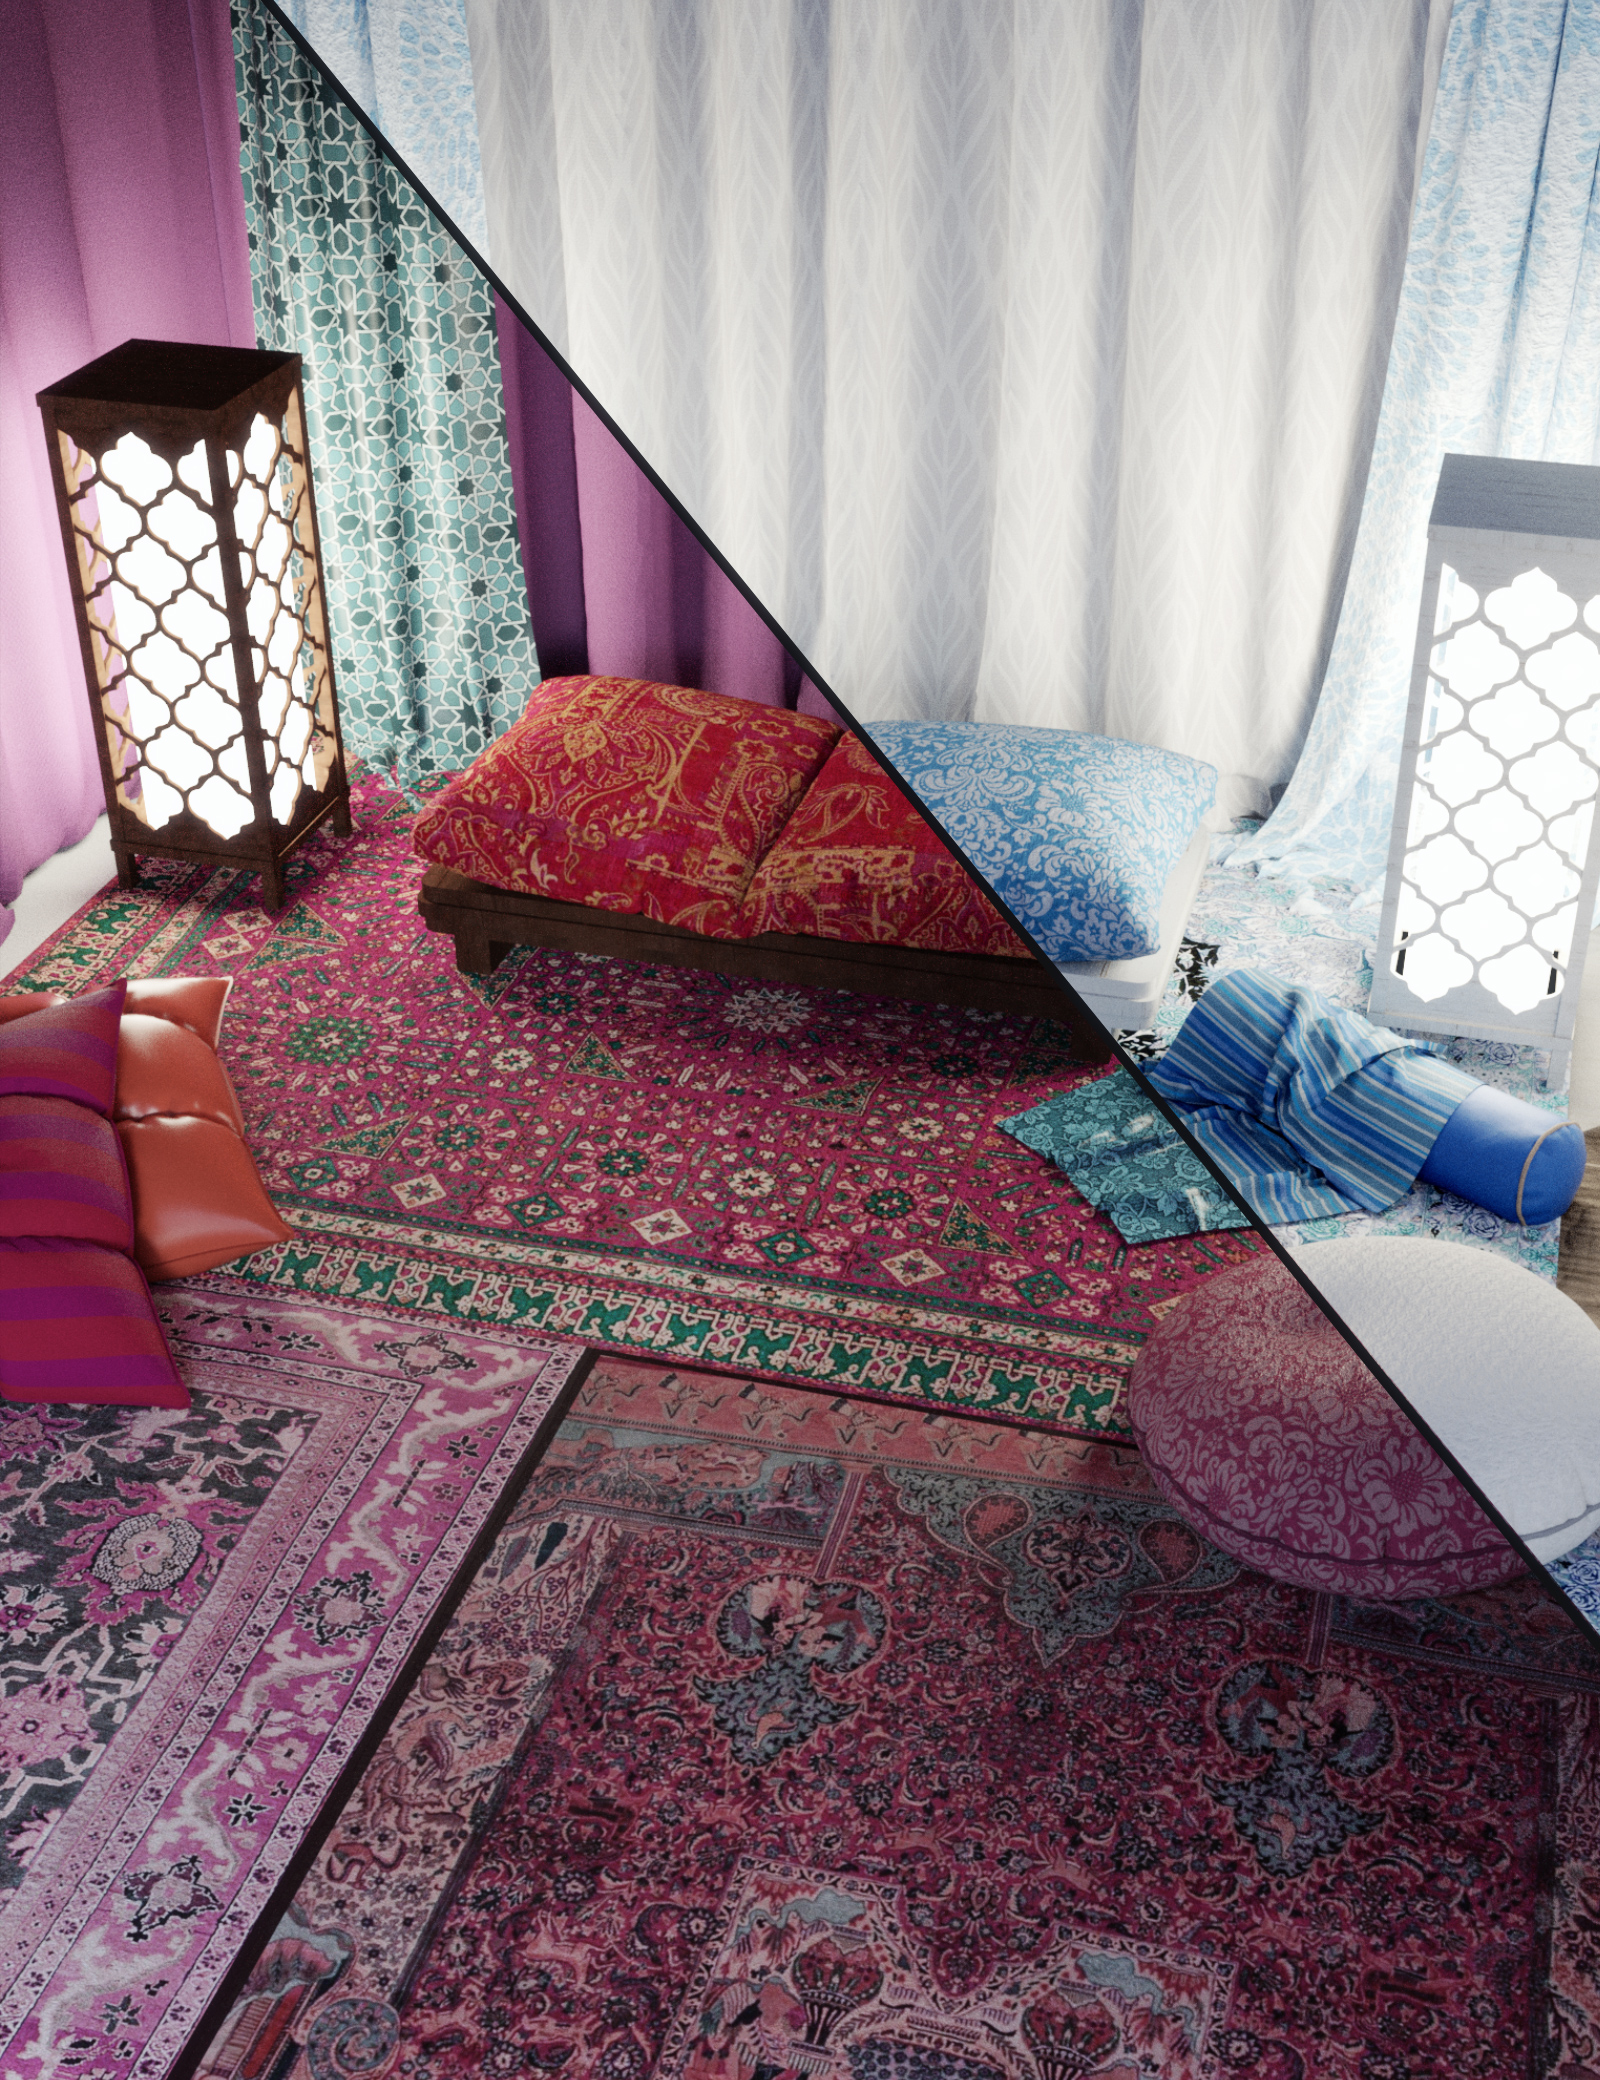 Moroccan Tent by: Neikdian, 3D Models by Daz 3D